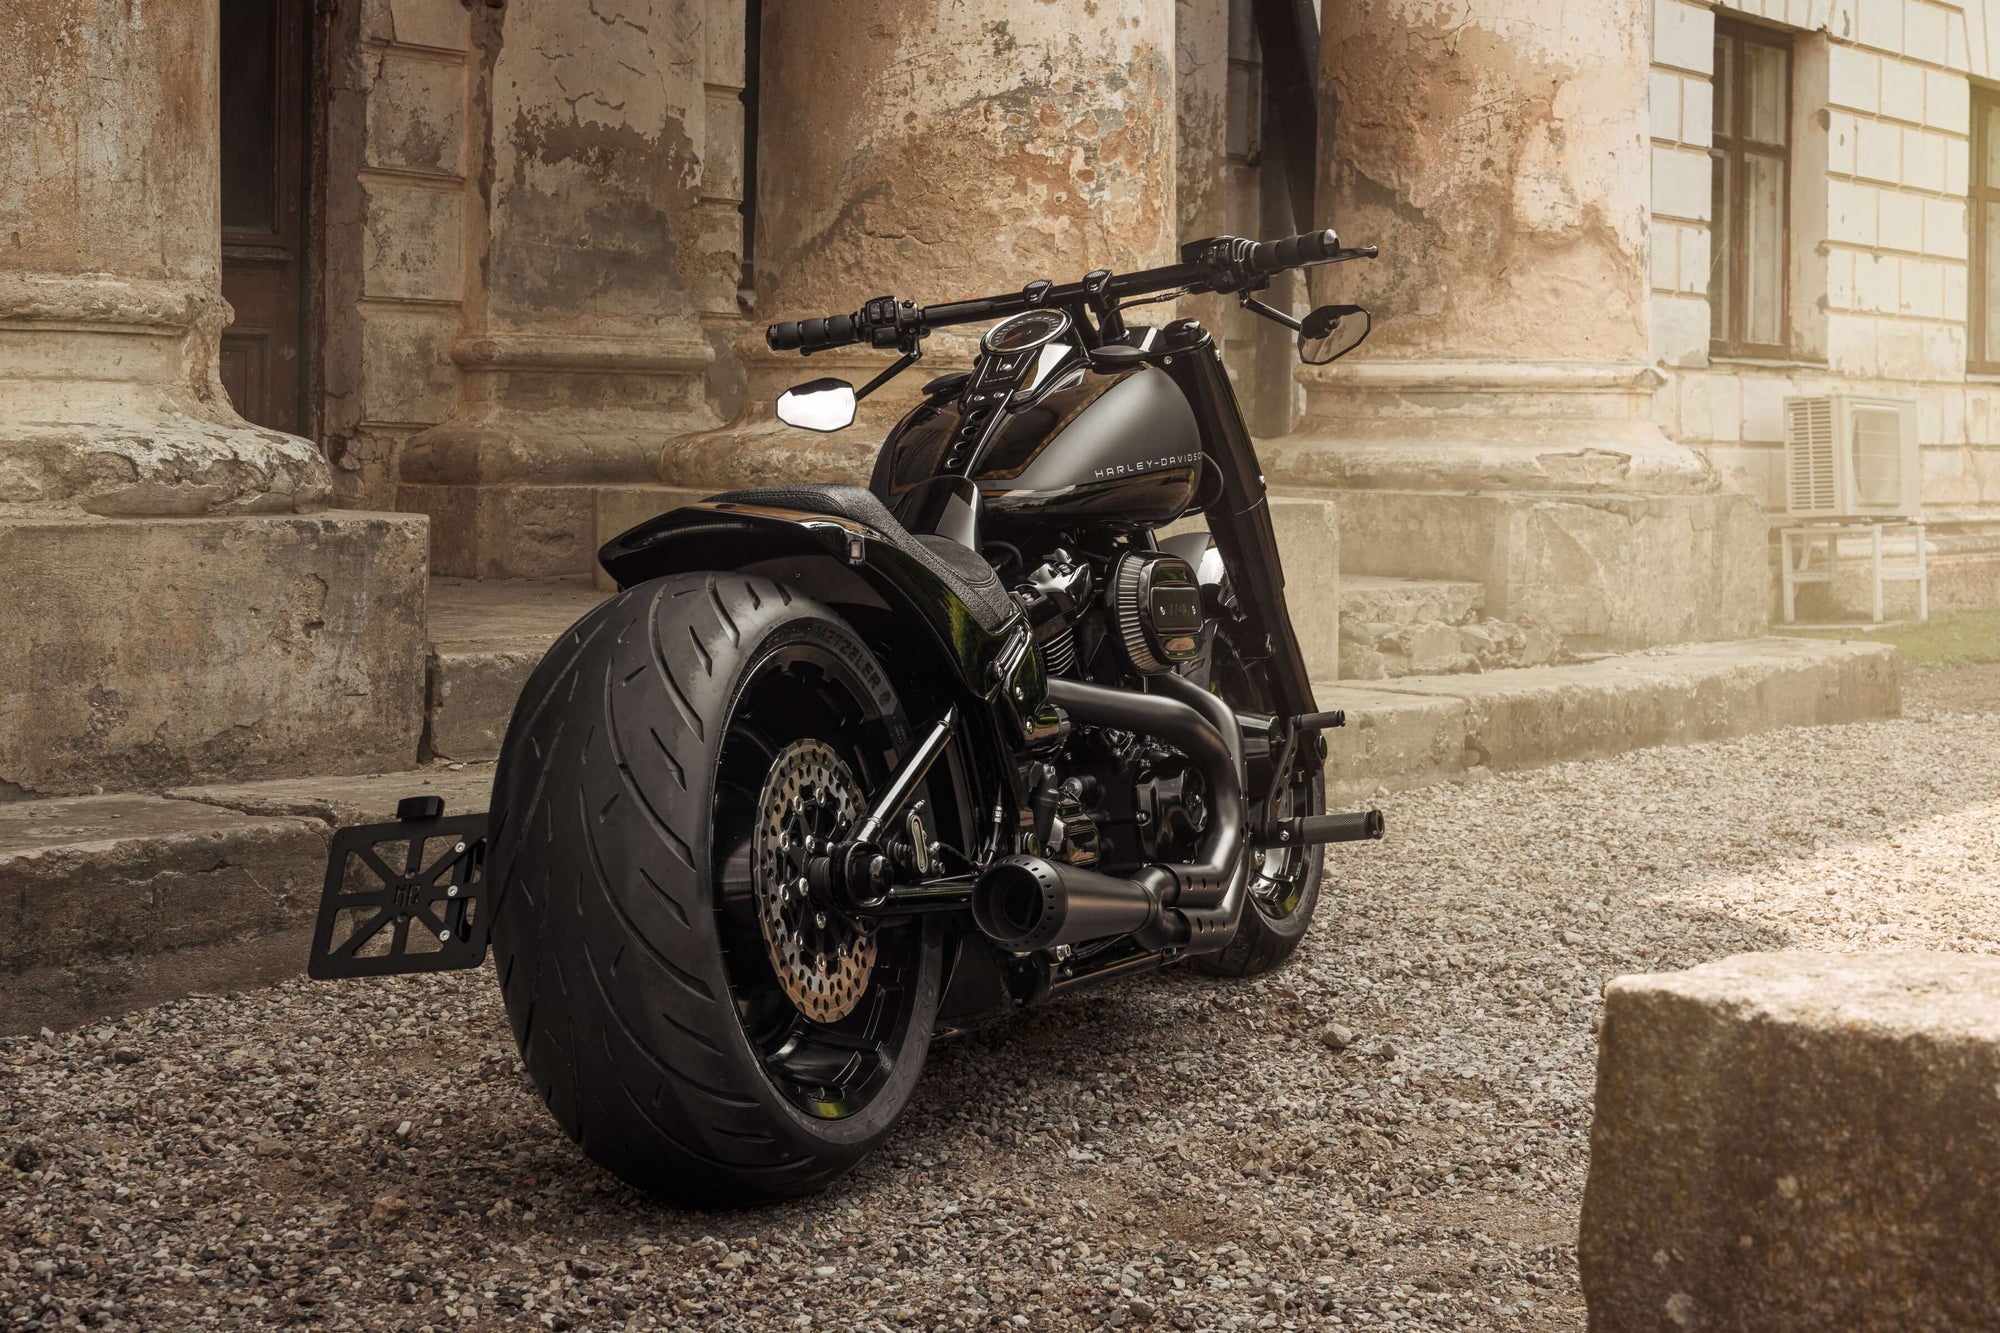 Modified Harley Davidson Fat Boy  motorcycle with Killer Custom parts from the rear with an old mansion in the background